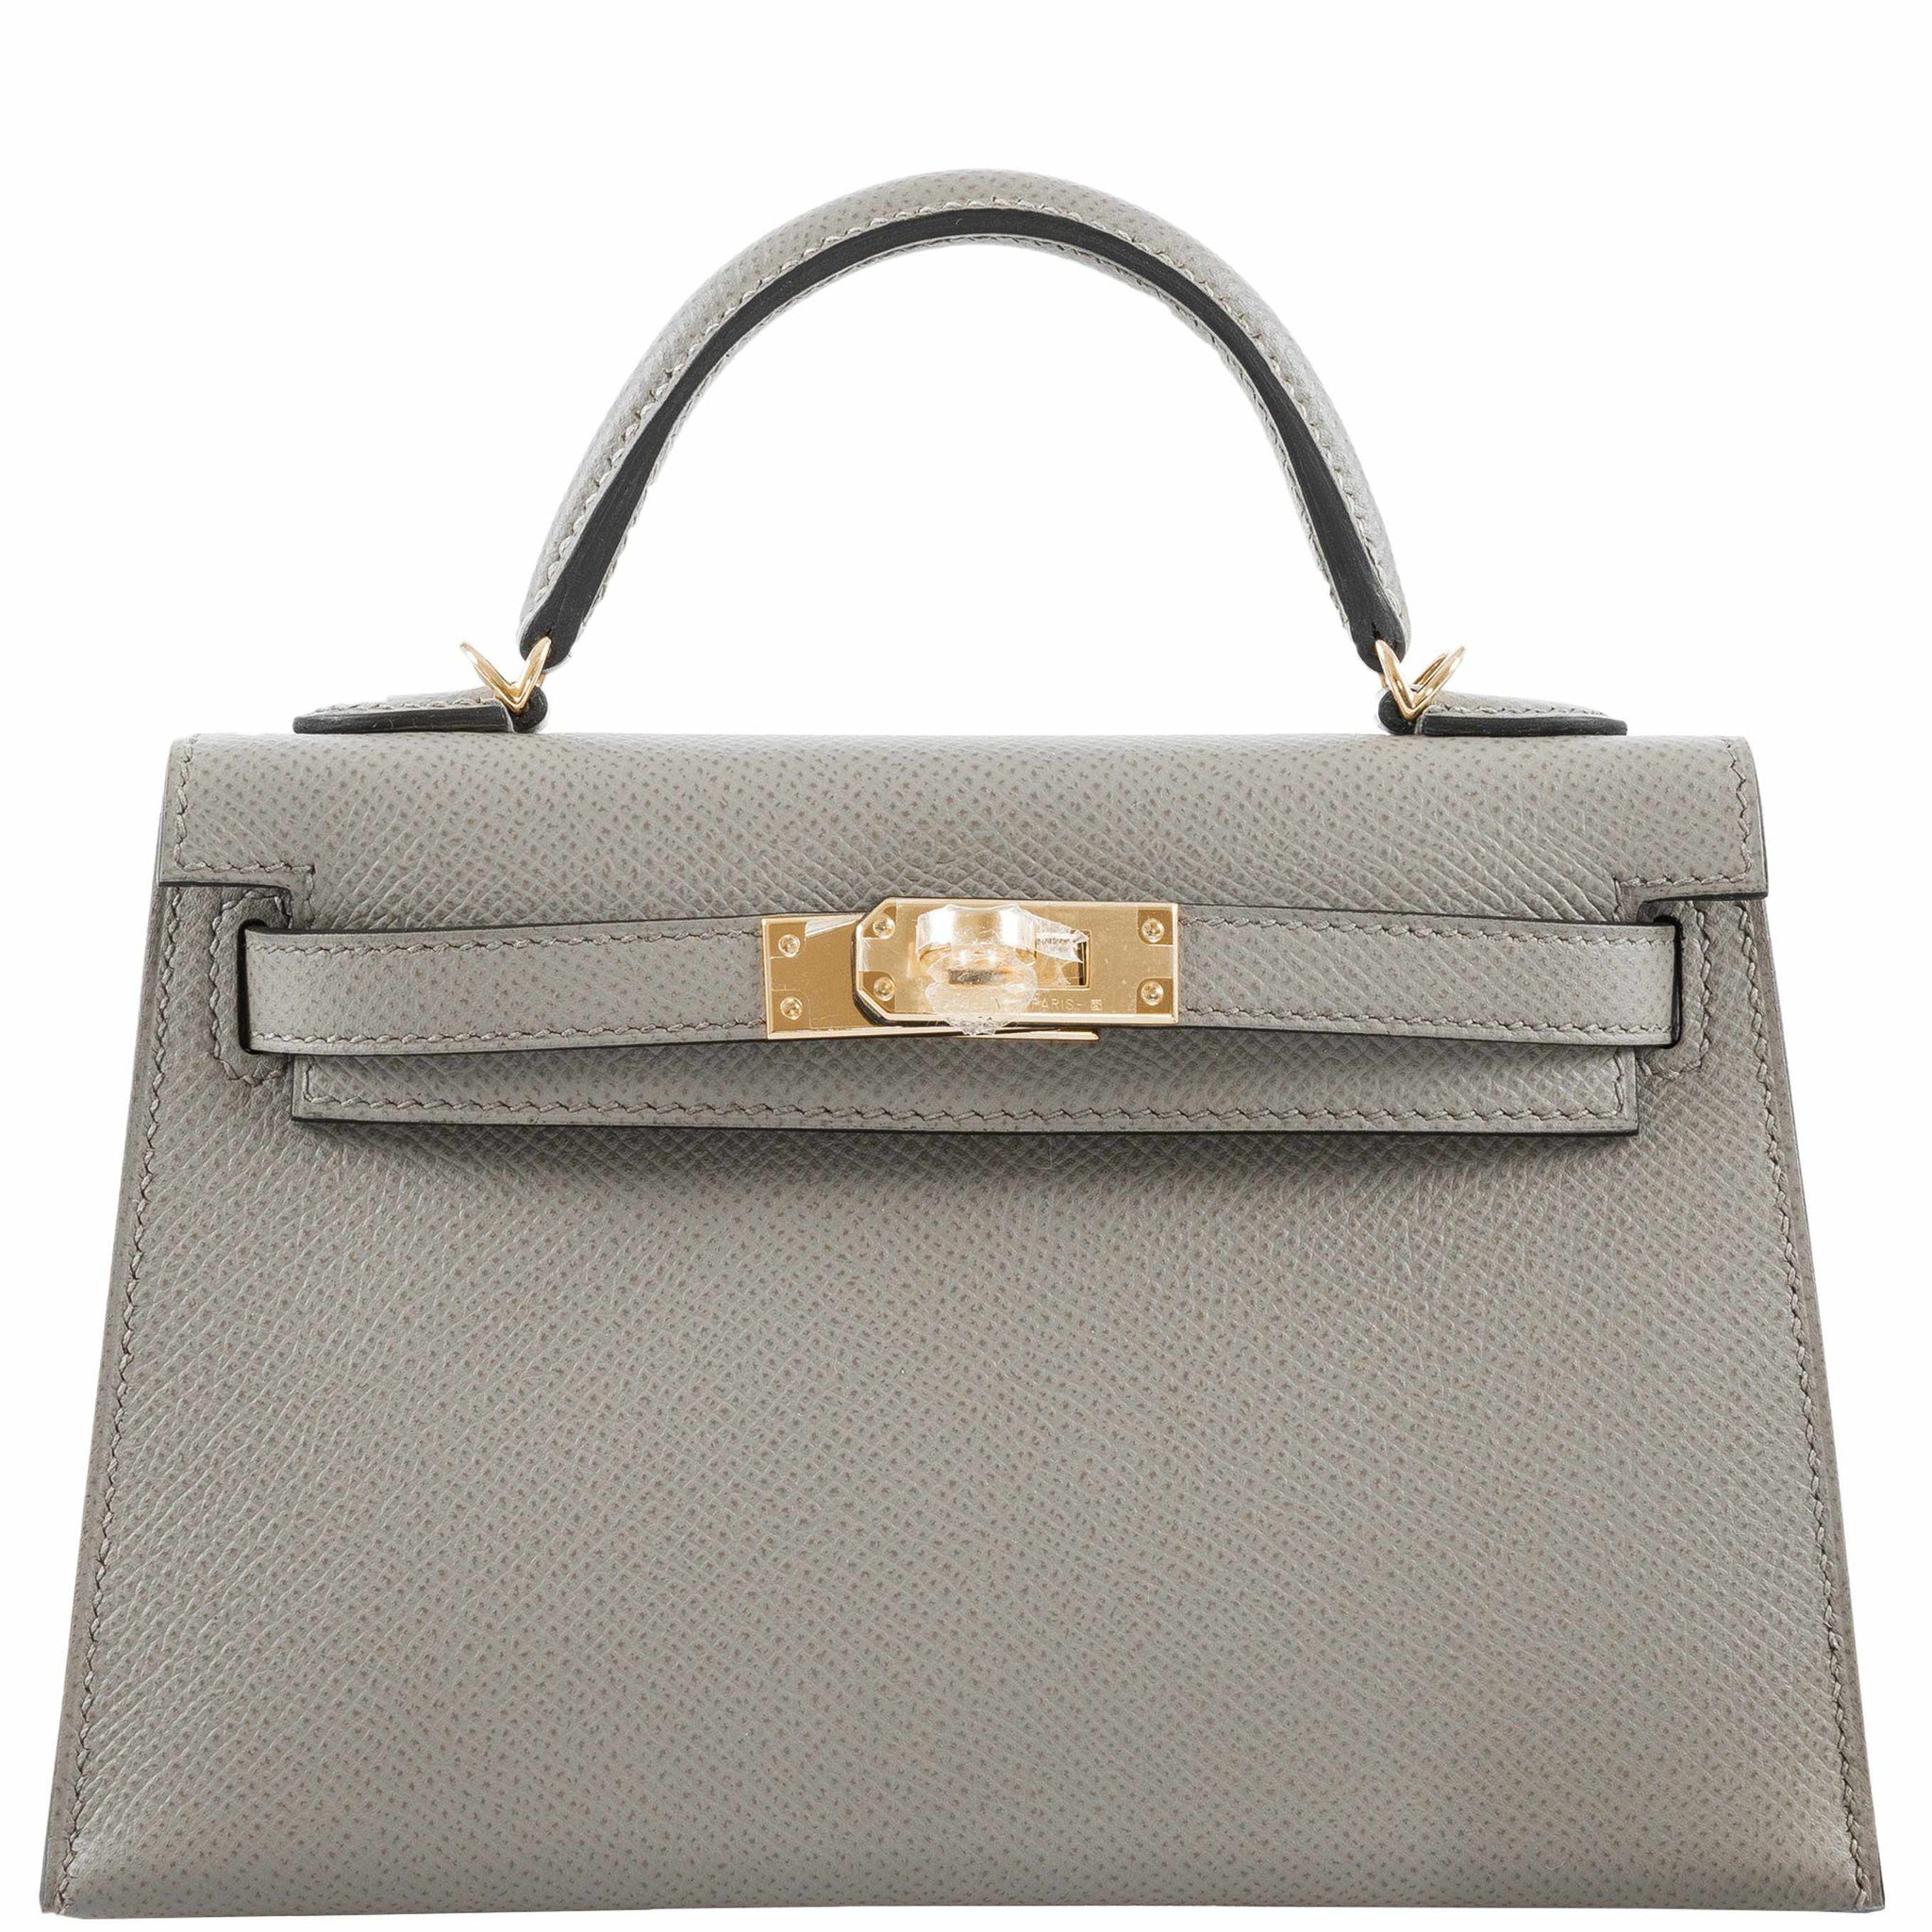 A GRIS ASPHALTE EPSOM LEATHER MINI KELLY 20 II WITH GOLD HARDWARE